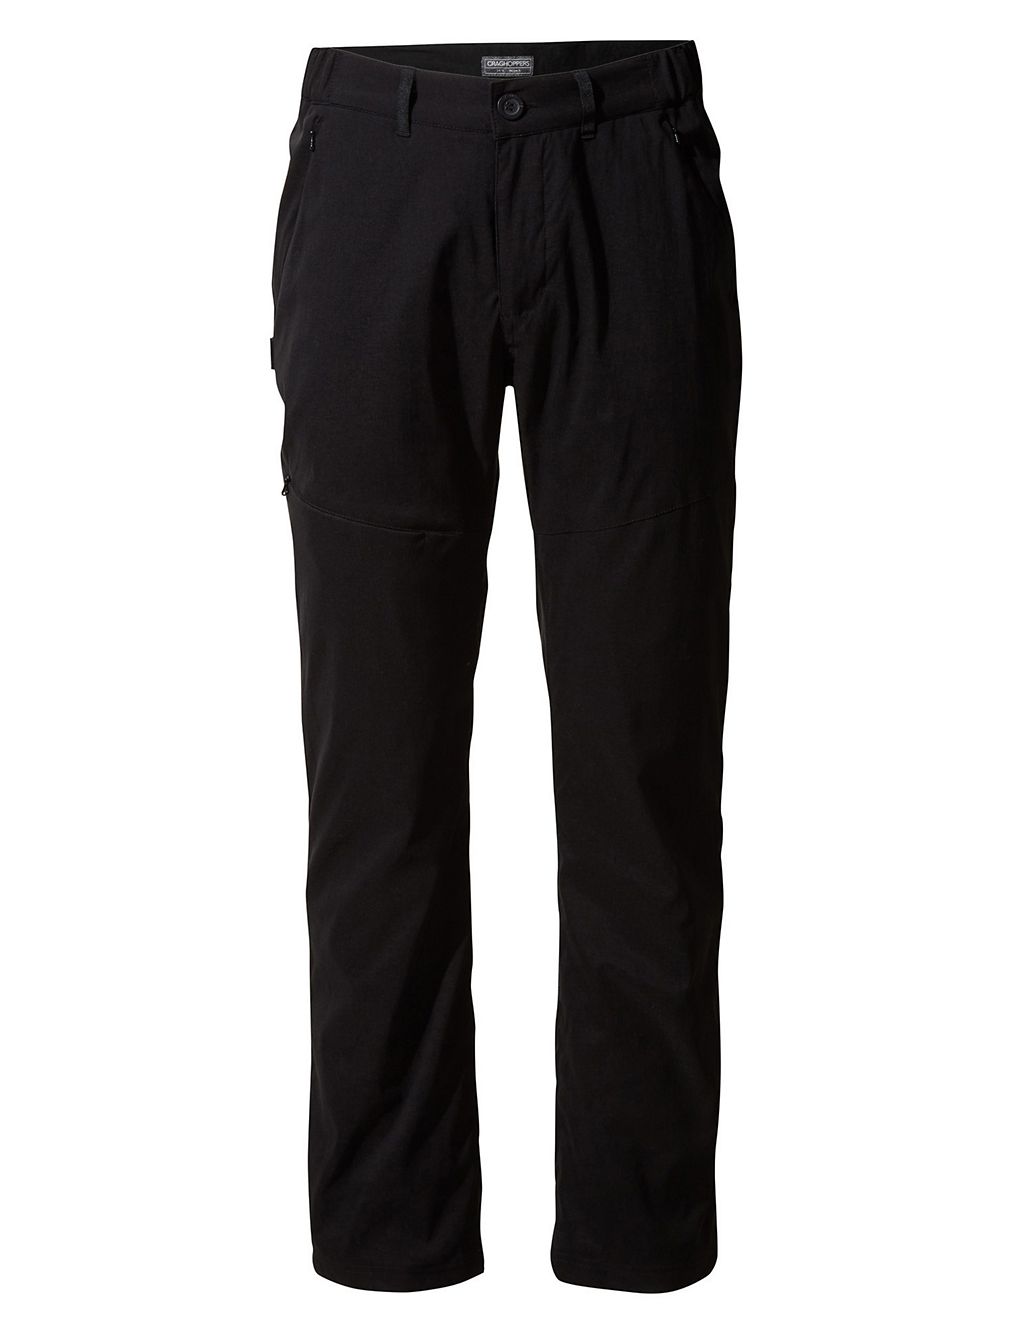 Kiwi Tailored Fit Trekking Trousers 1 of 7